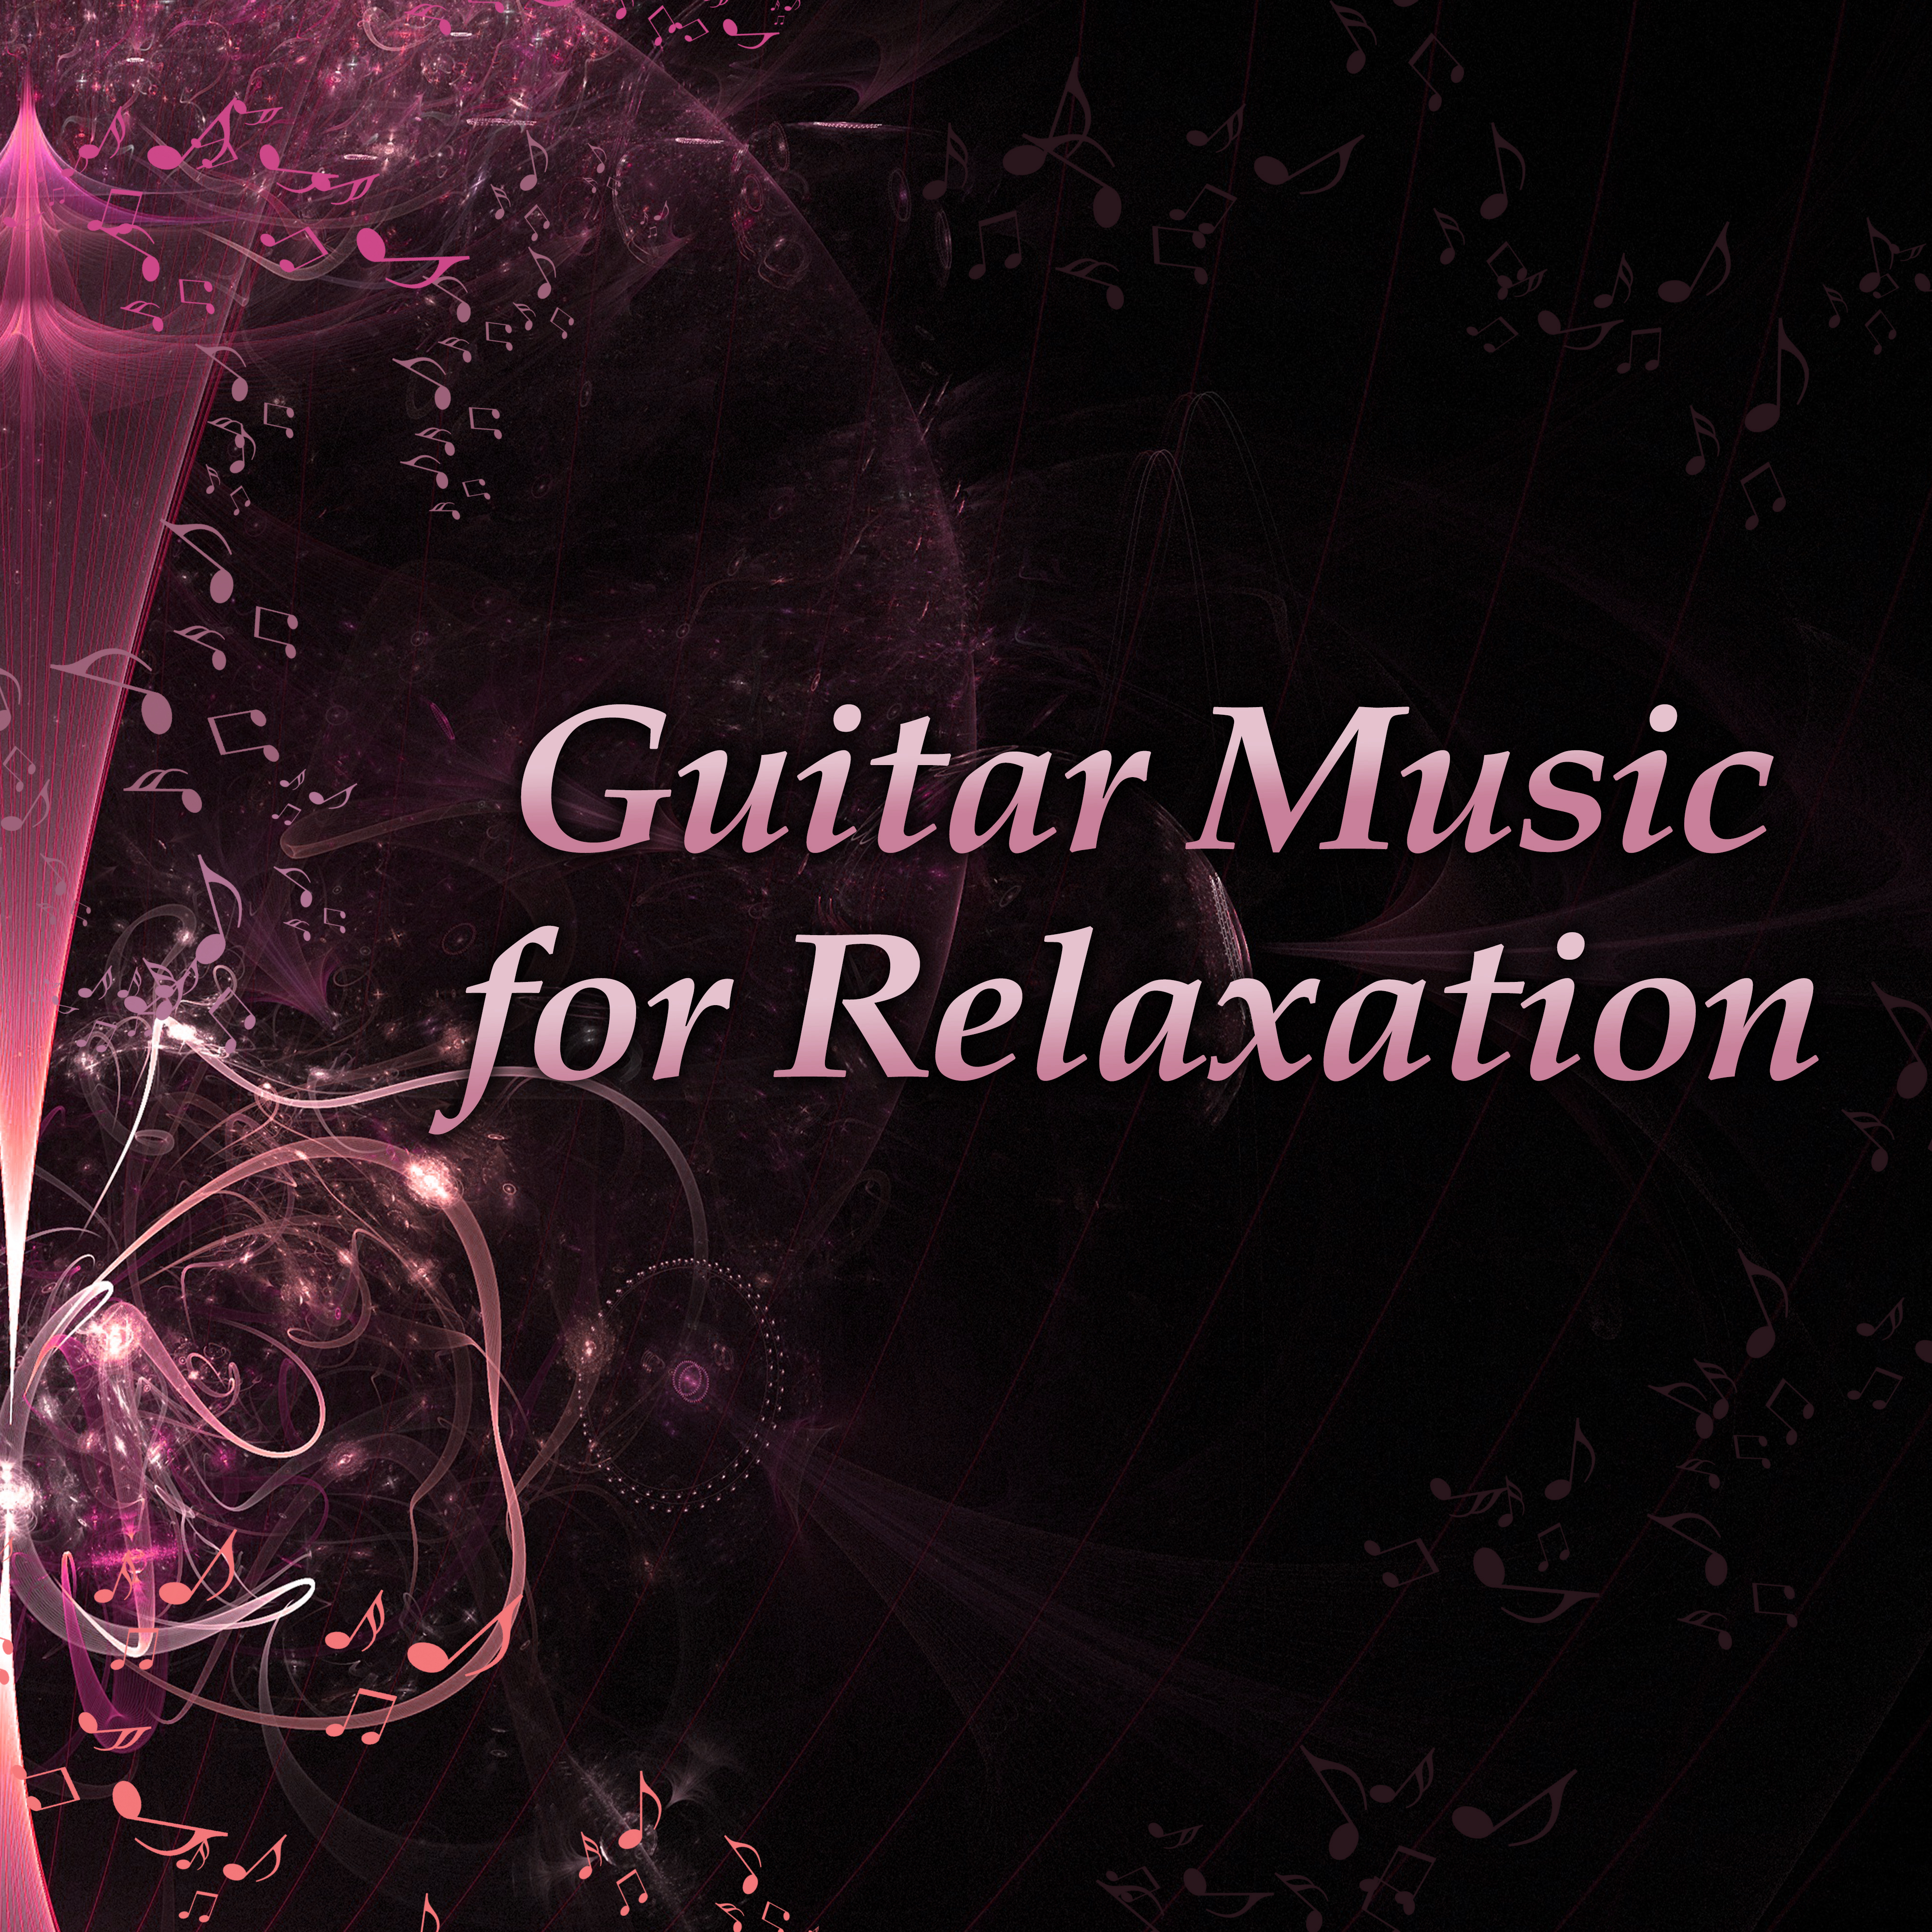 Guitar Music for Relaxation  Jazz Music, Piano  Guitar Jazz, Sounds of Relaxation, Evening Moods